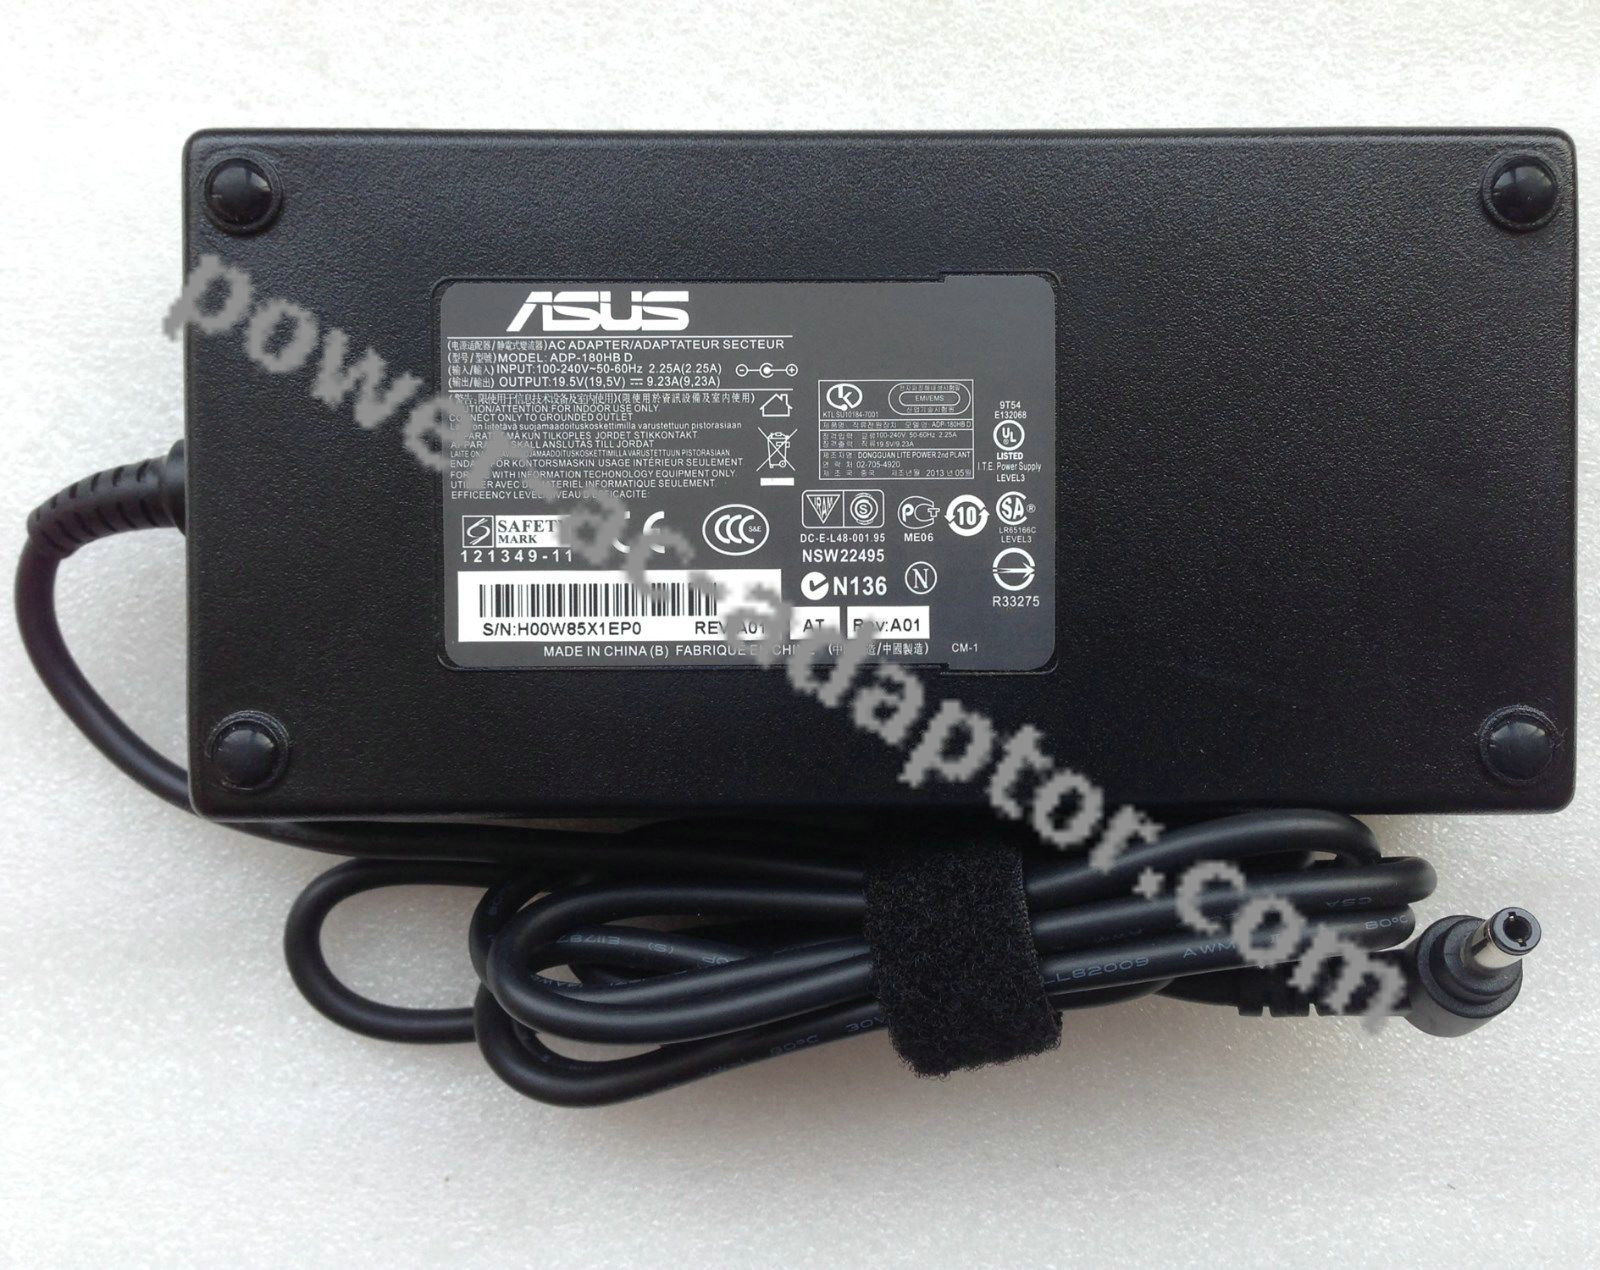 ASUS 180W 19.5V 9.23A AC Adapter for ROG G750JX-RB71 Gaming